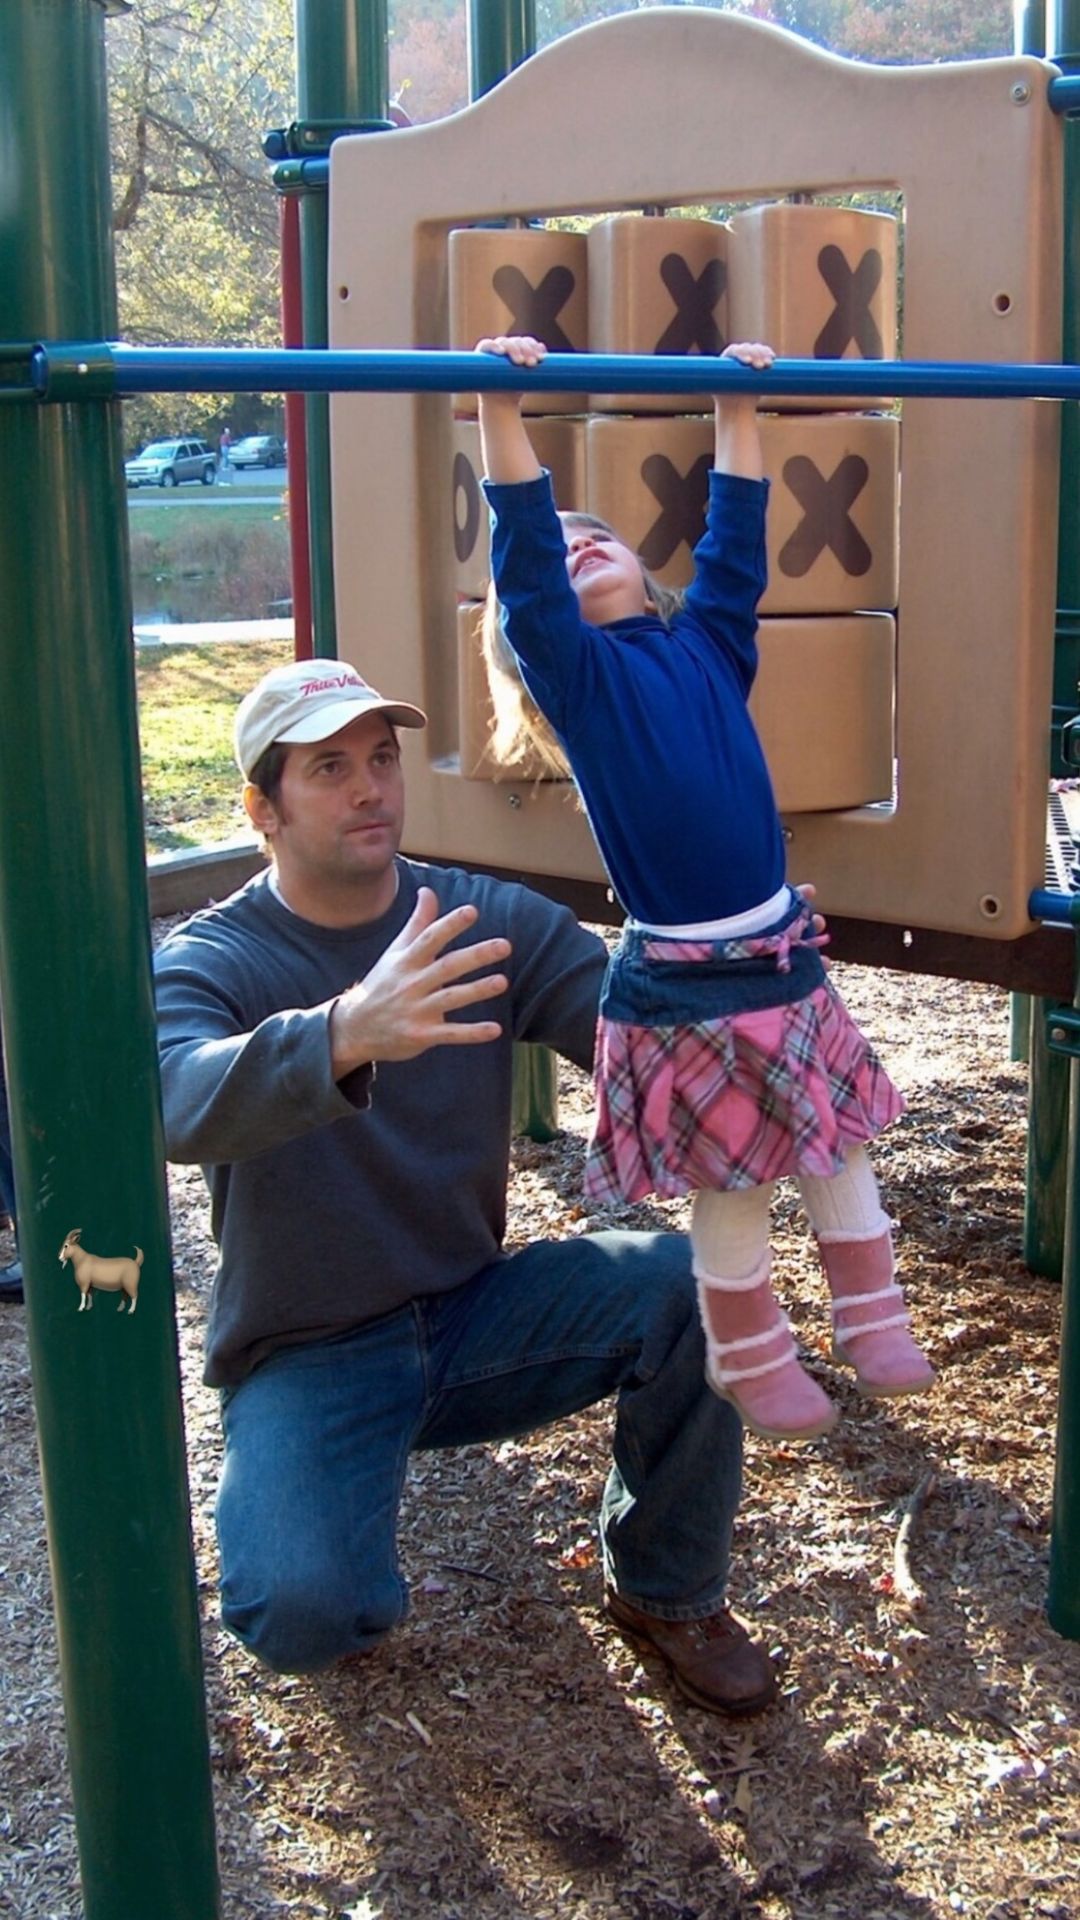 Olivia also posted a picture of her younger self with her dad while at the playground